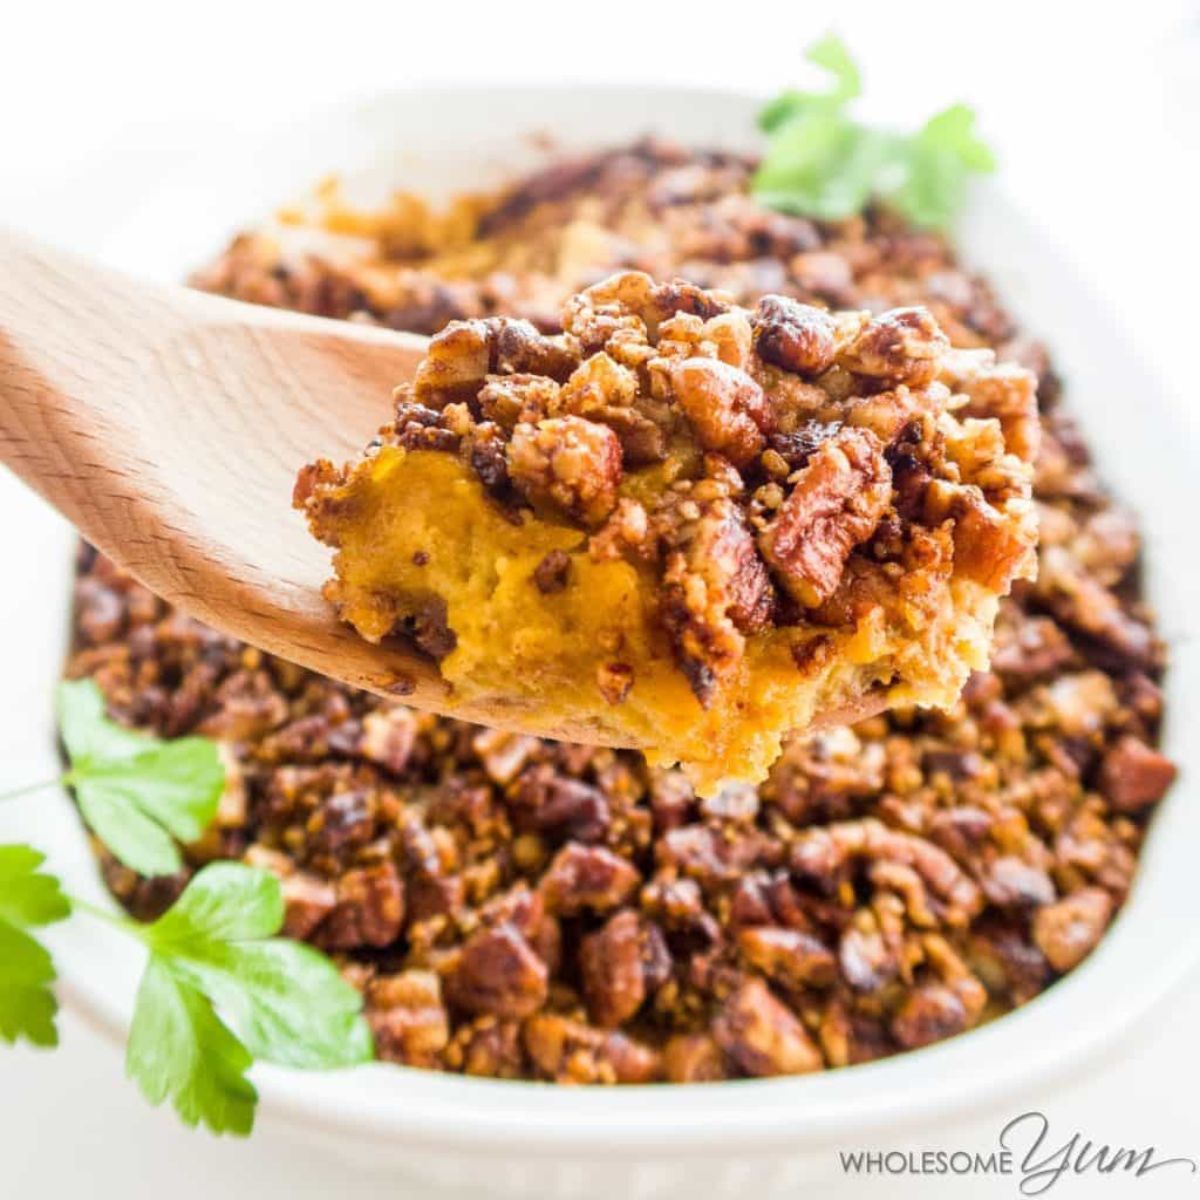 A white bowl of sweet potato casserole with parsely garnish is in the background. In the foreground is a wooden spoon with a spoonfull of the casserole on it